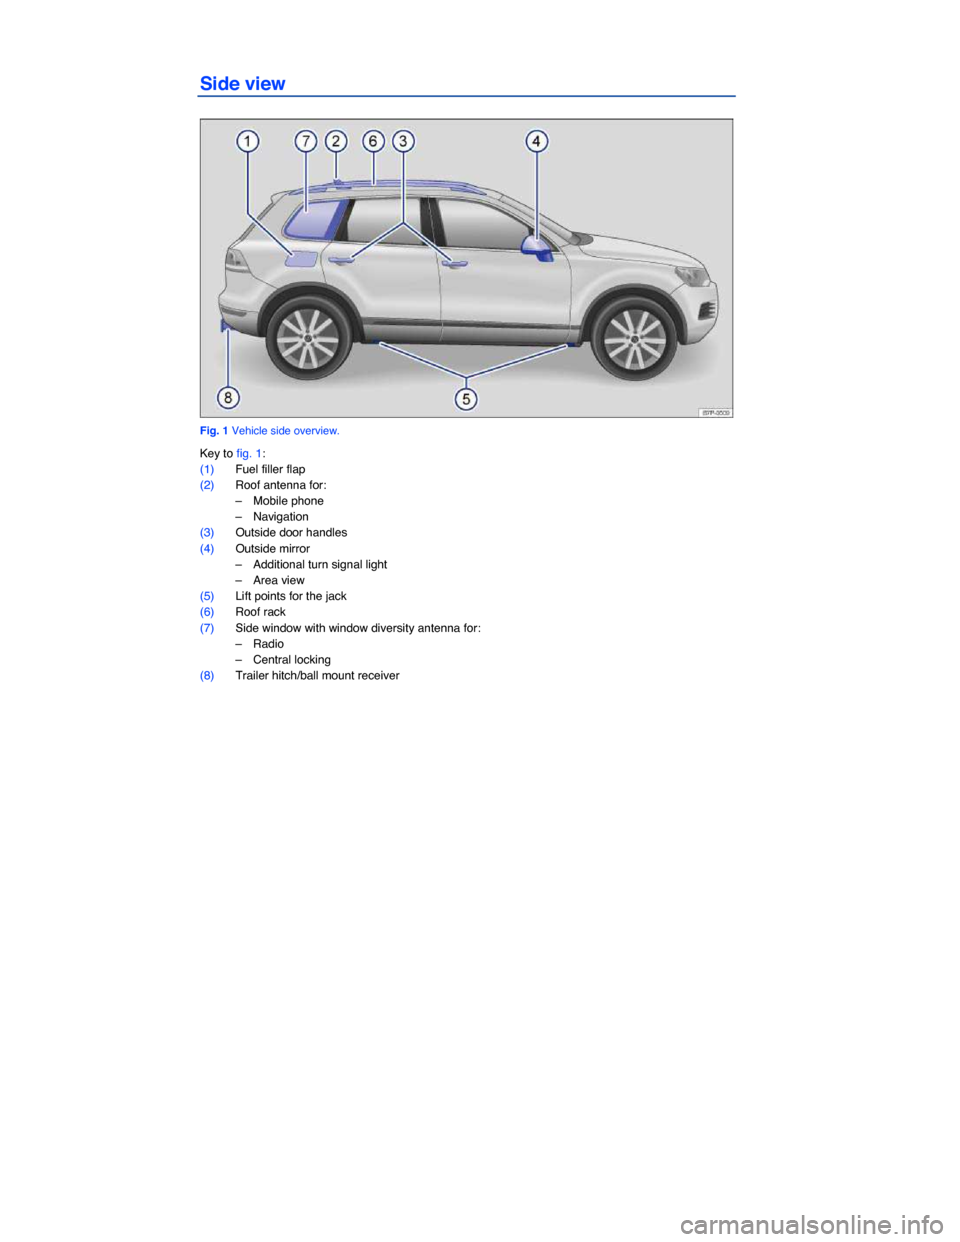 VOLKSWAGEN TOUAREG 2014 2.G Owners Manual  
Side view 
 
Fig. 1 Vehicle side overview. 
Key to fig. 1: 
(1) Fuel filler flap  
(2) Roof antenna for:  
–  Mobile phone  
–  Navigation  
(3) Outside door handles  
(4) Outside mirror  
–  